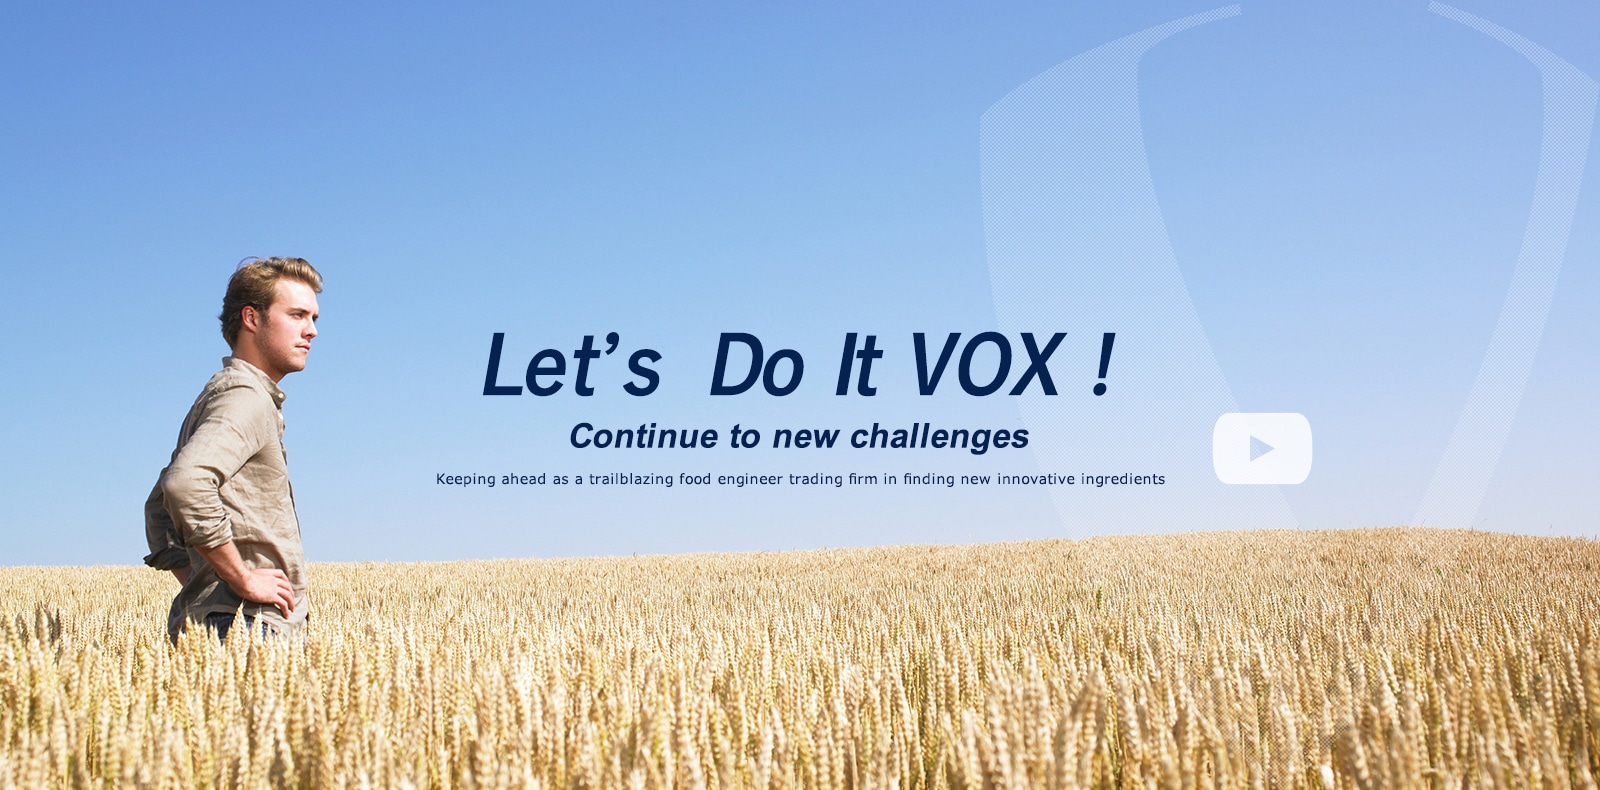 Let's Get It Done VOX! Continue to new challenges. Keeping ahead as a pioneering Food Engineering company in finding new innovative ingredients.